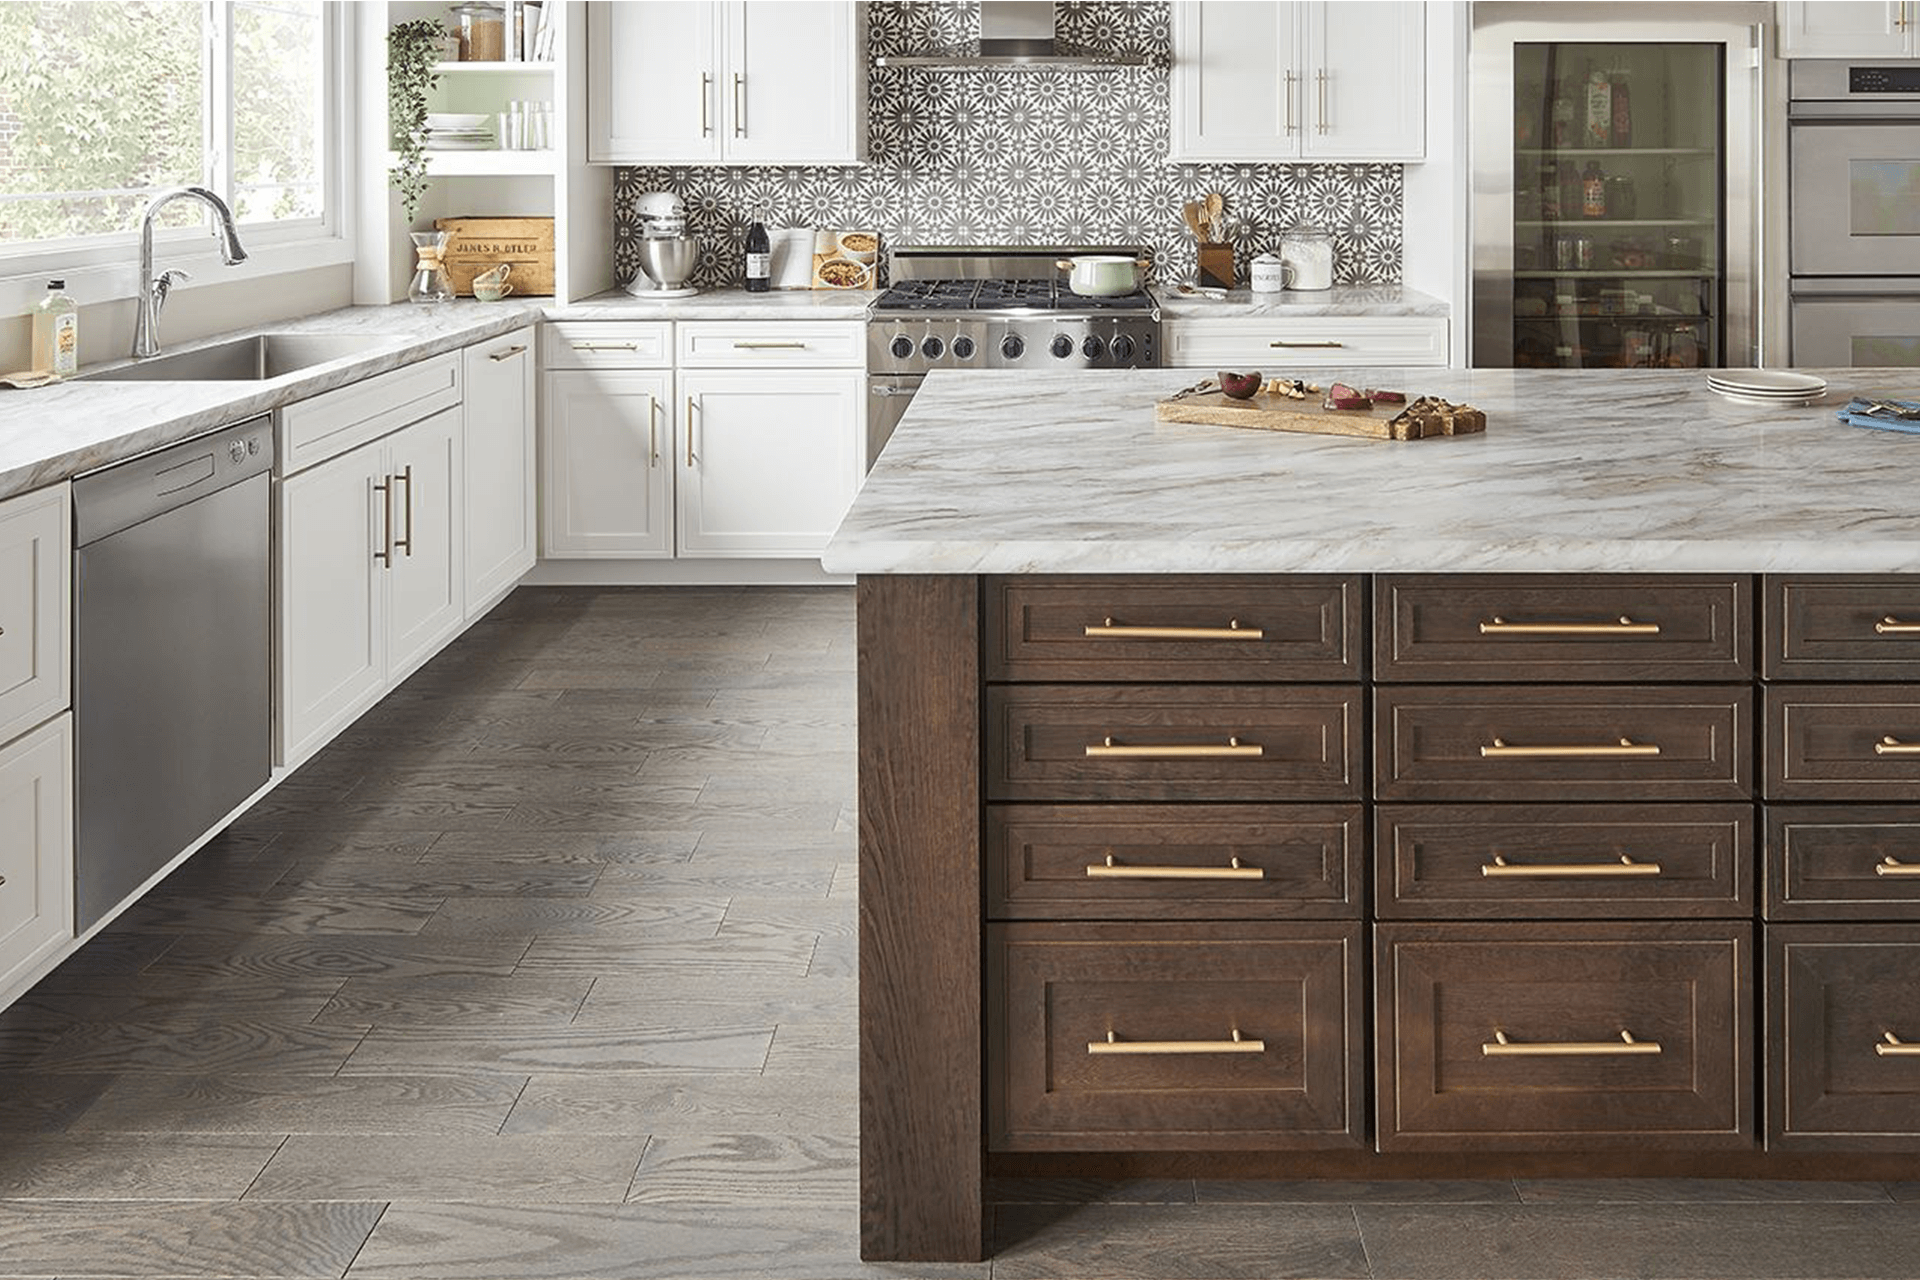 Kitchen cabinet trends, kitchen design using a mix of different wood cabinets, designed by Lumberjack's Kitchens and Baths, serving Cleveland, Akron, Canton and all of the northeast Ohio area.